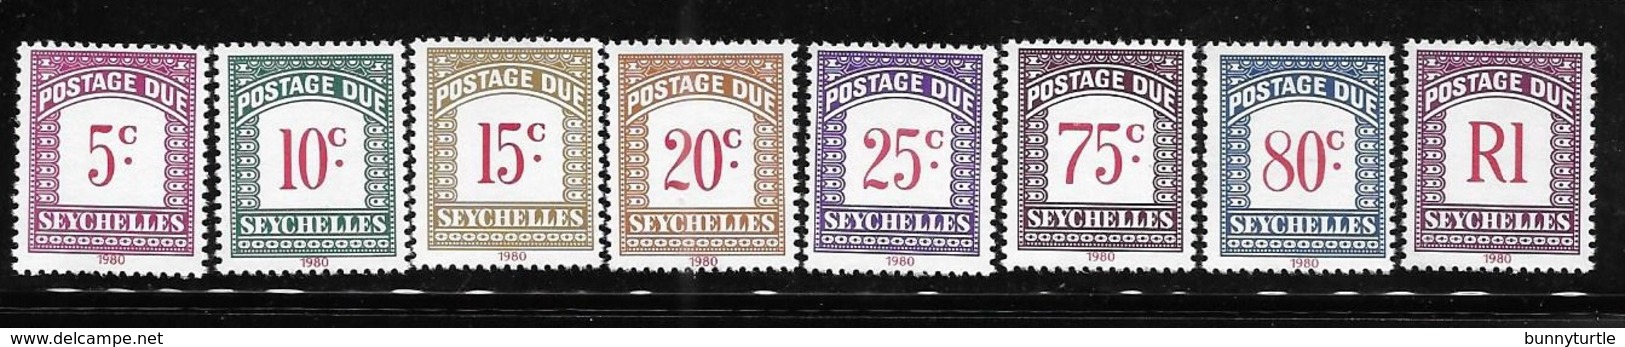 Seychelles 1980 Postage Due Stamps MNH - Seychelles (1976-...)